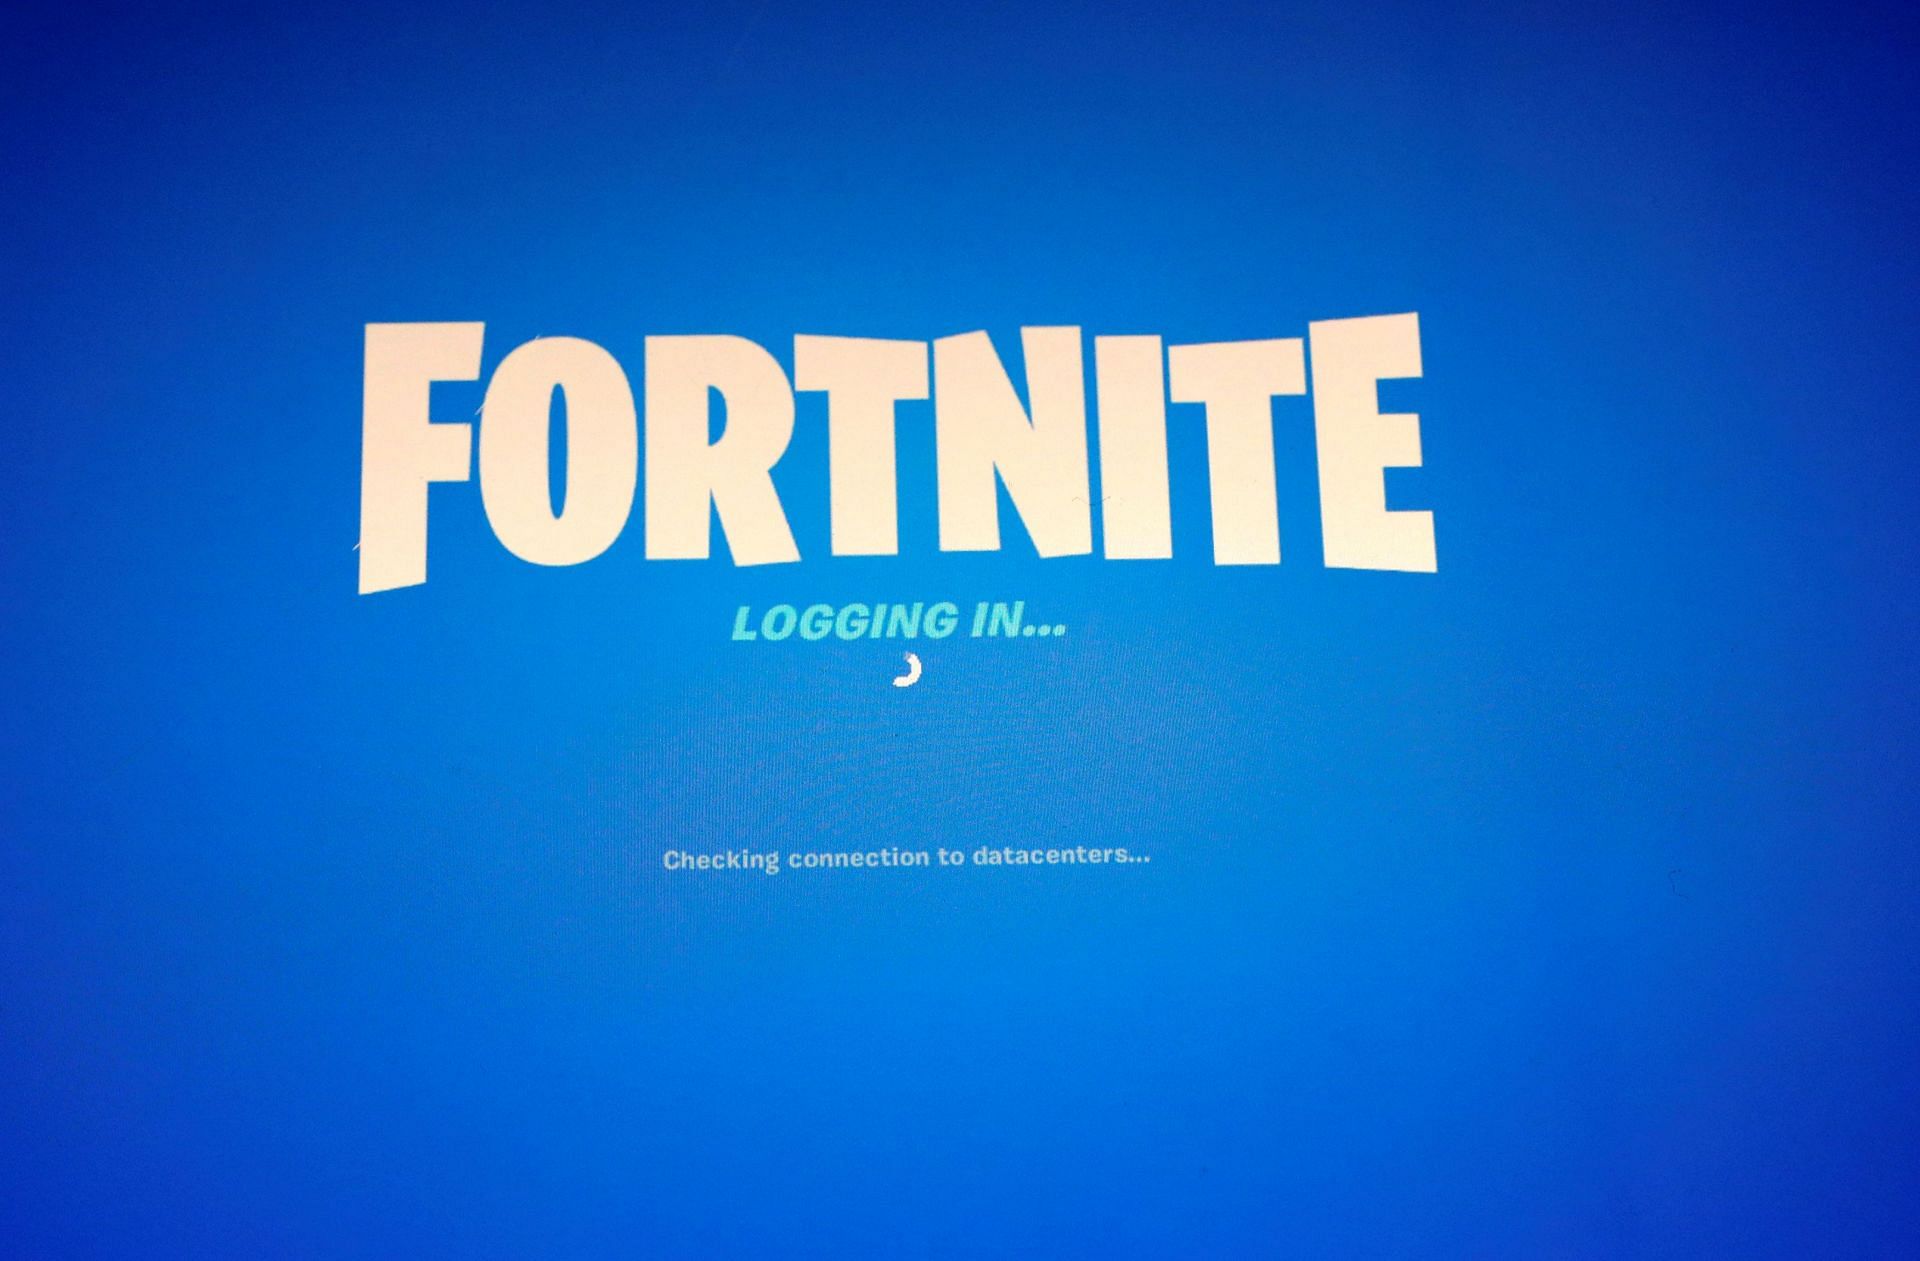 Players cannot evade ban in Fortnite (Image via Reuters)